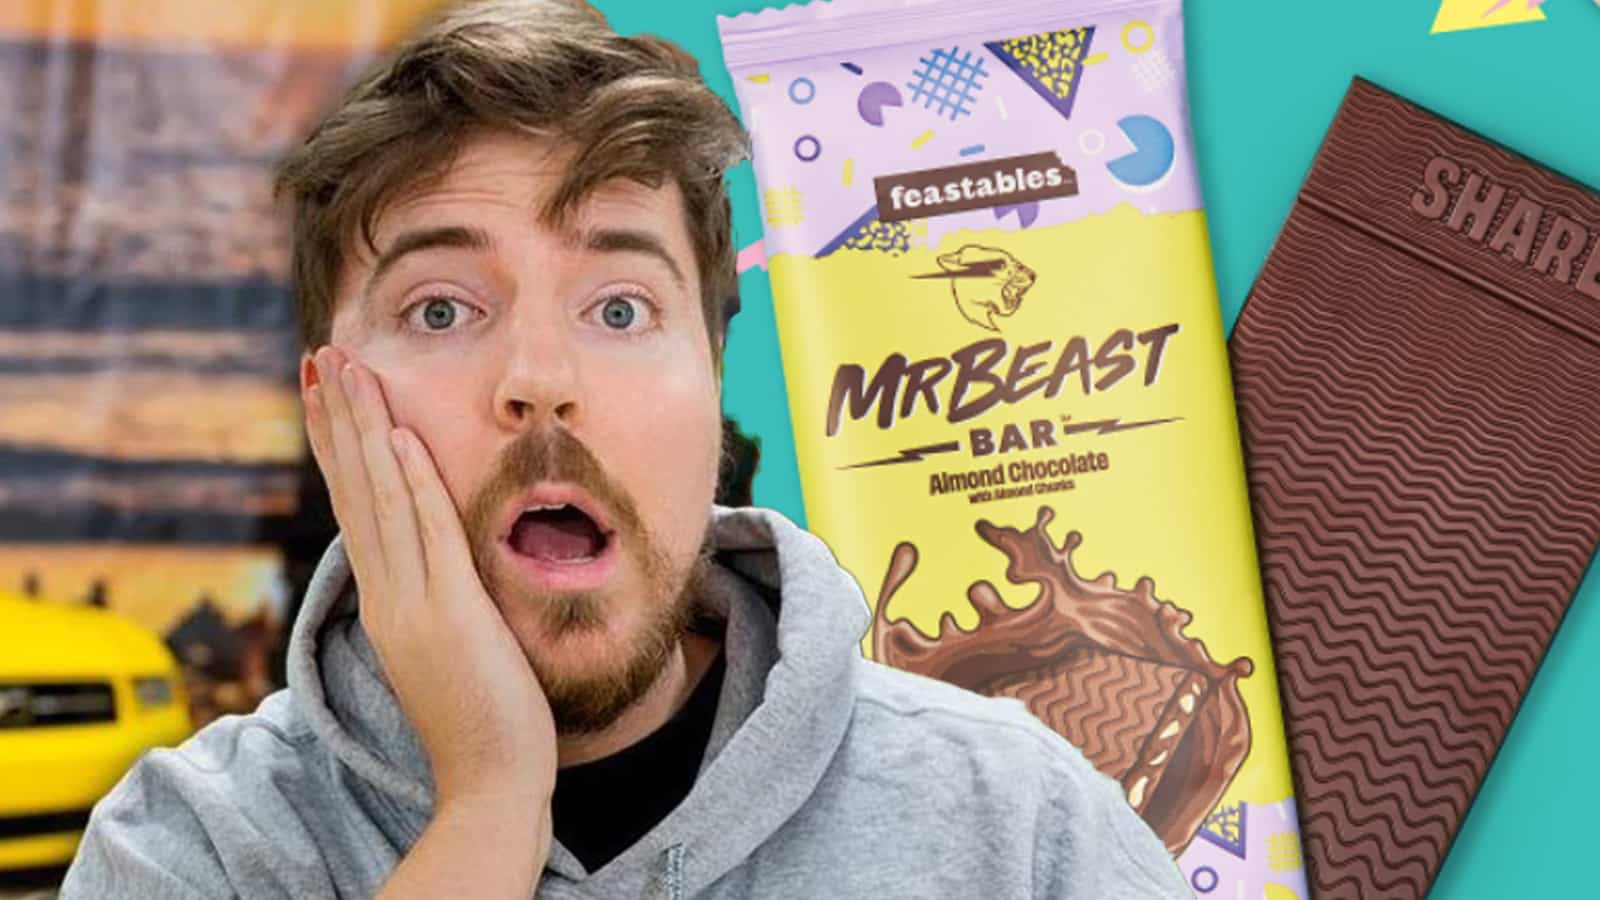 MrBeast reveals how much money feastables lost